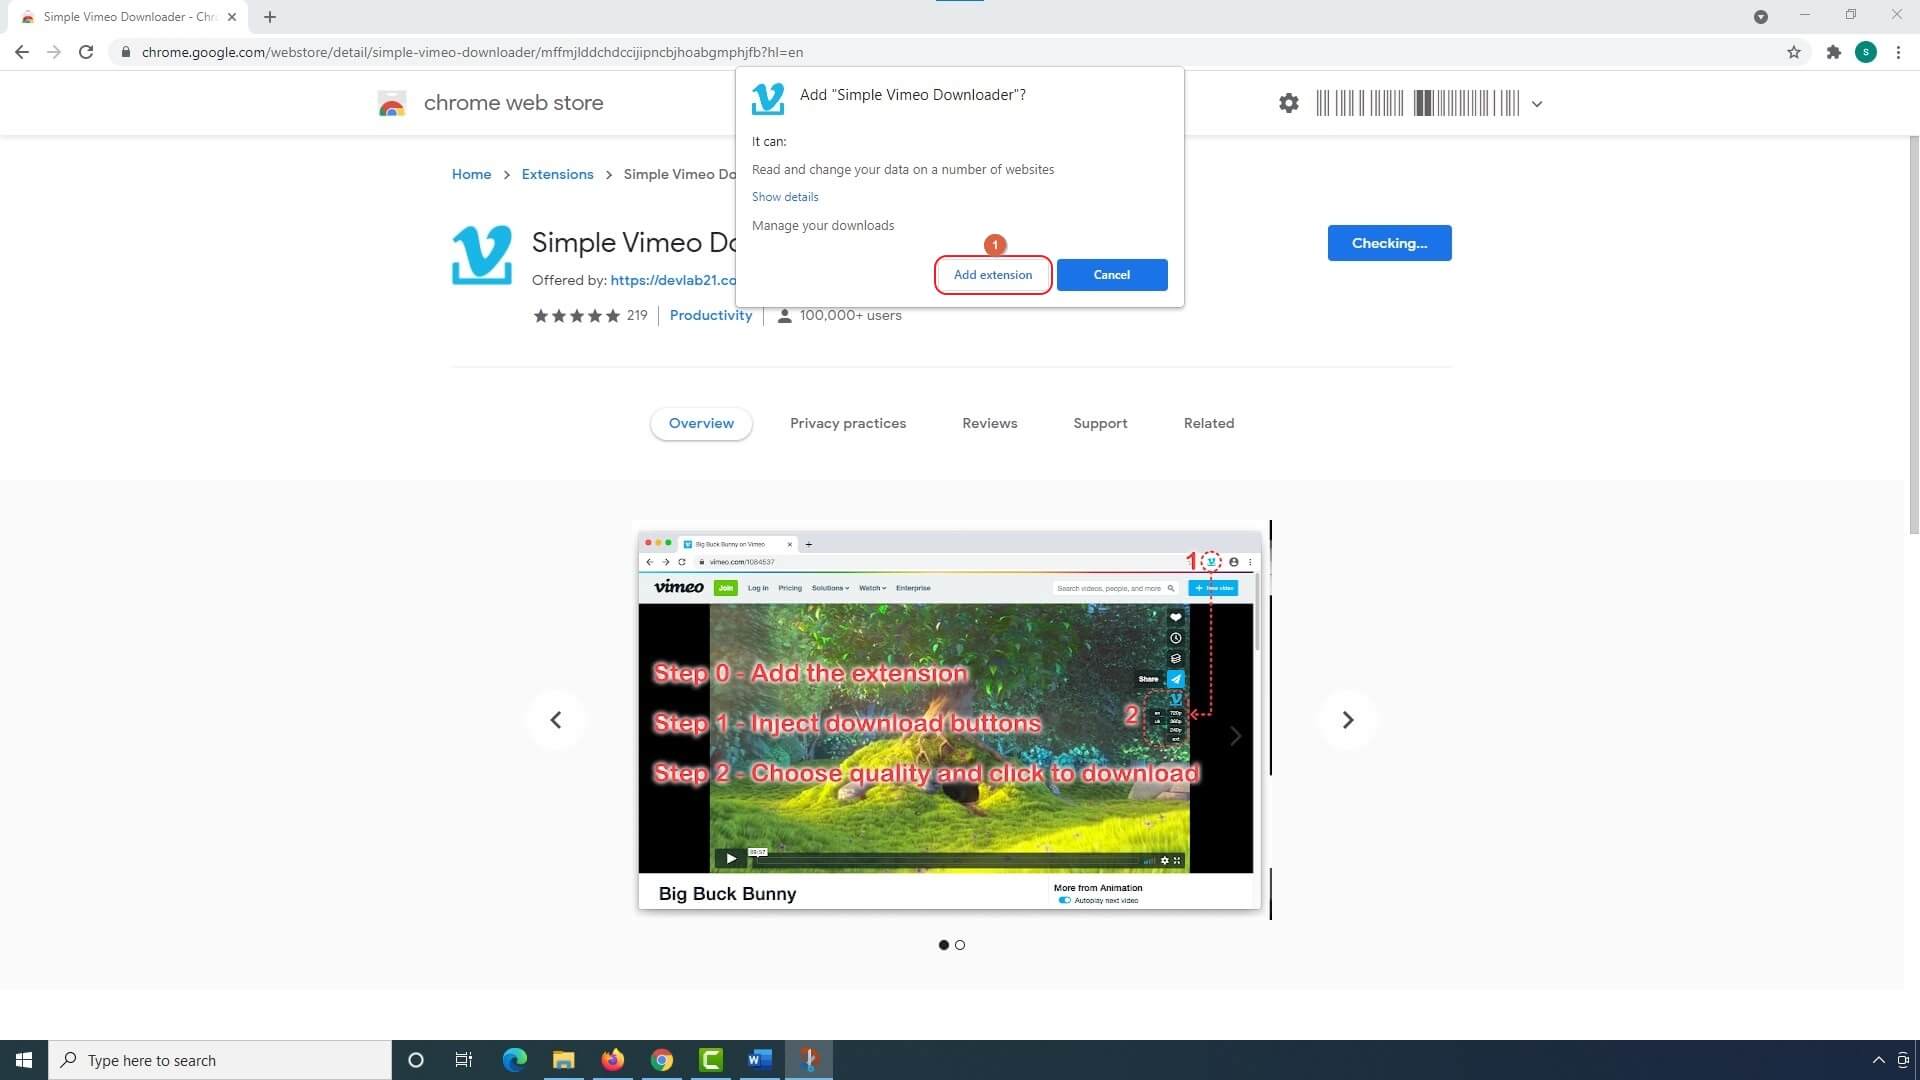  add Simple Vimeo Downloader Extension